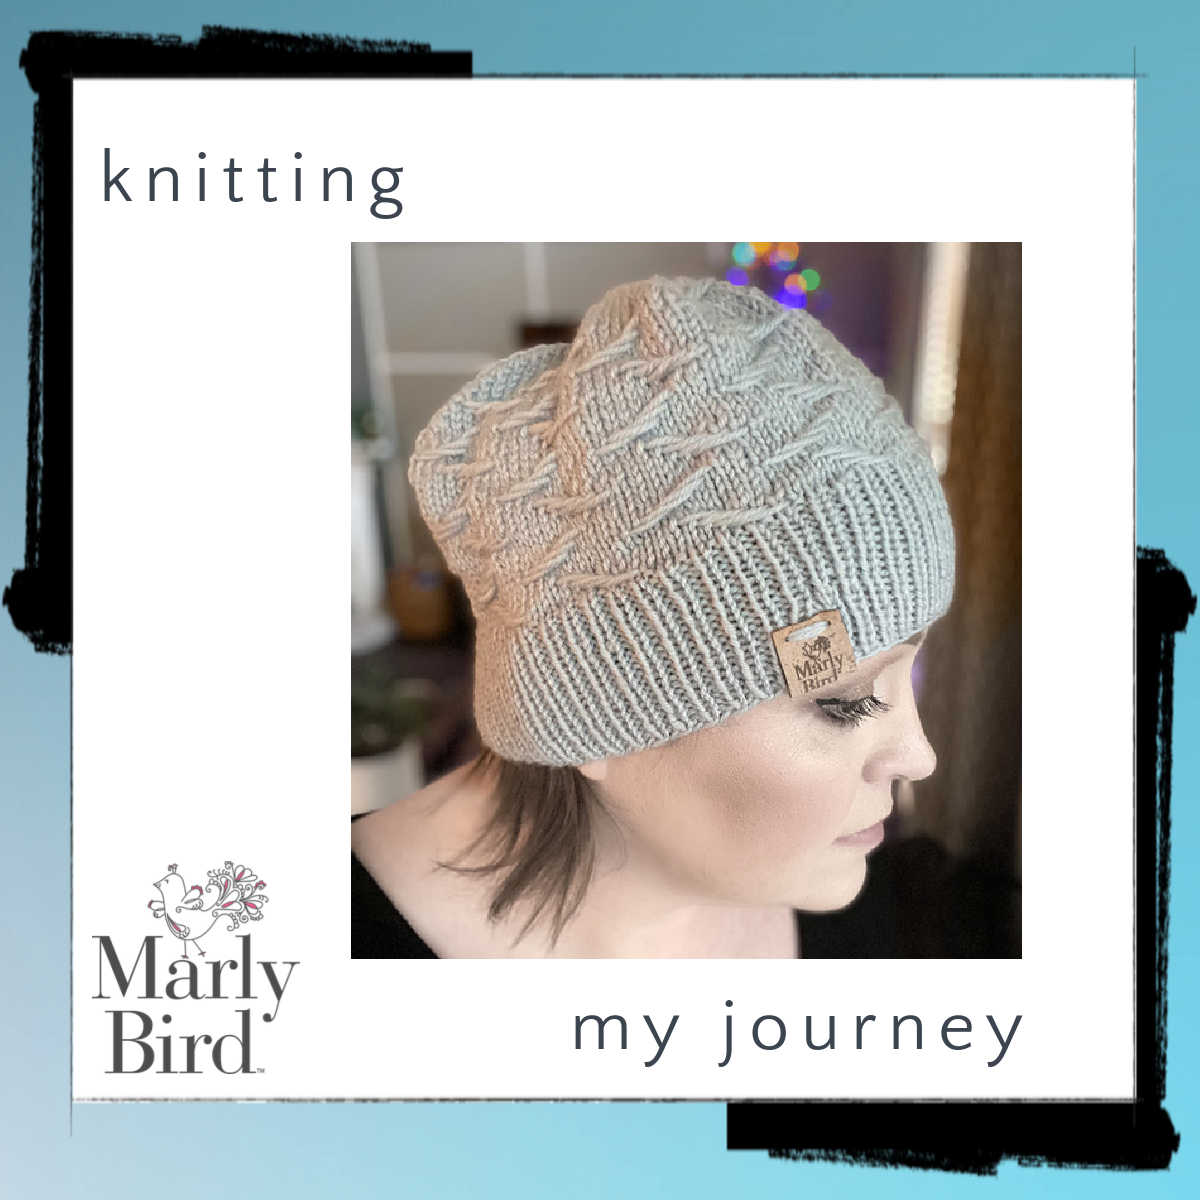 knitting with Marly Bird